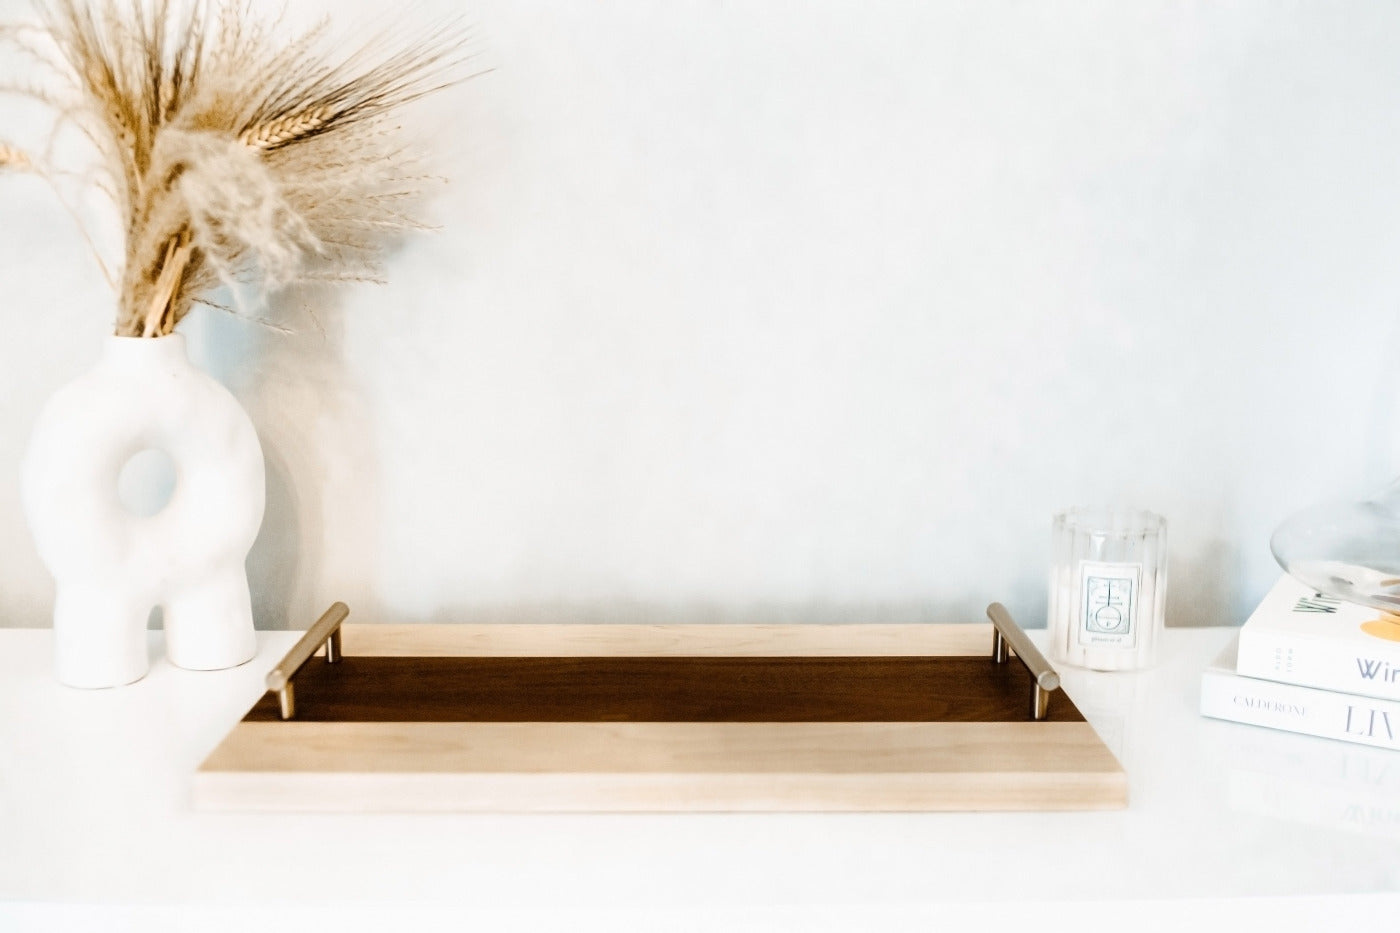 What charcuterie board dreams are made of. This solid hardwood Maple & Walnut serving tray is a versatile and functional work of art. | Serving & Bar Tray, Charcuterie Board - Maple & Walnut Hardwood